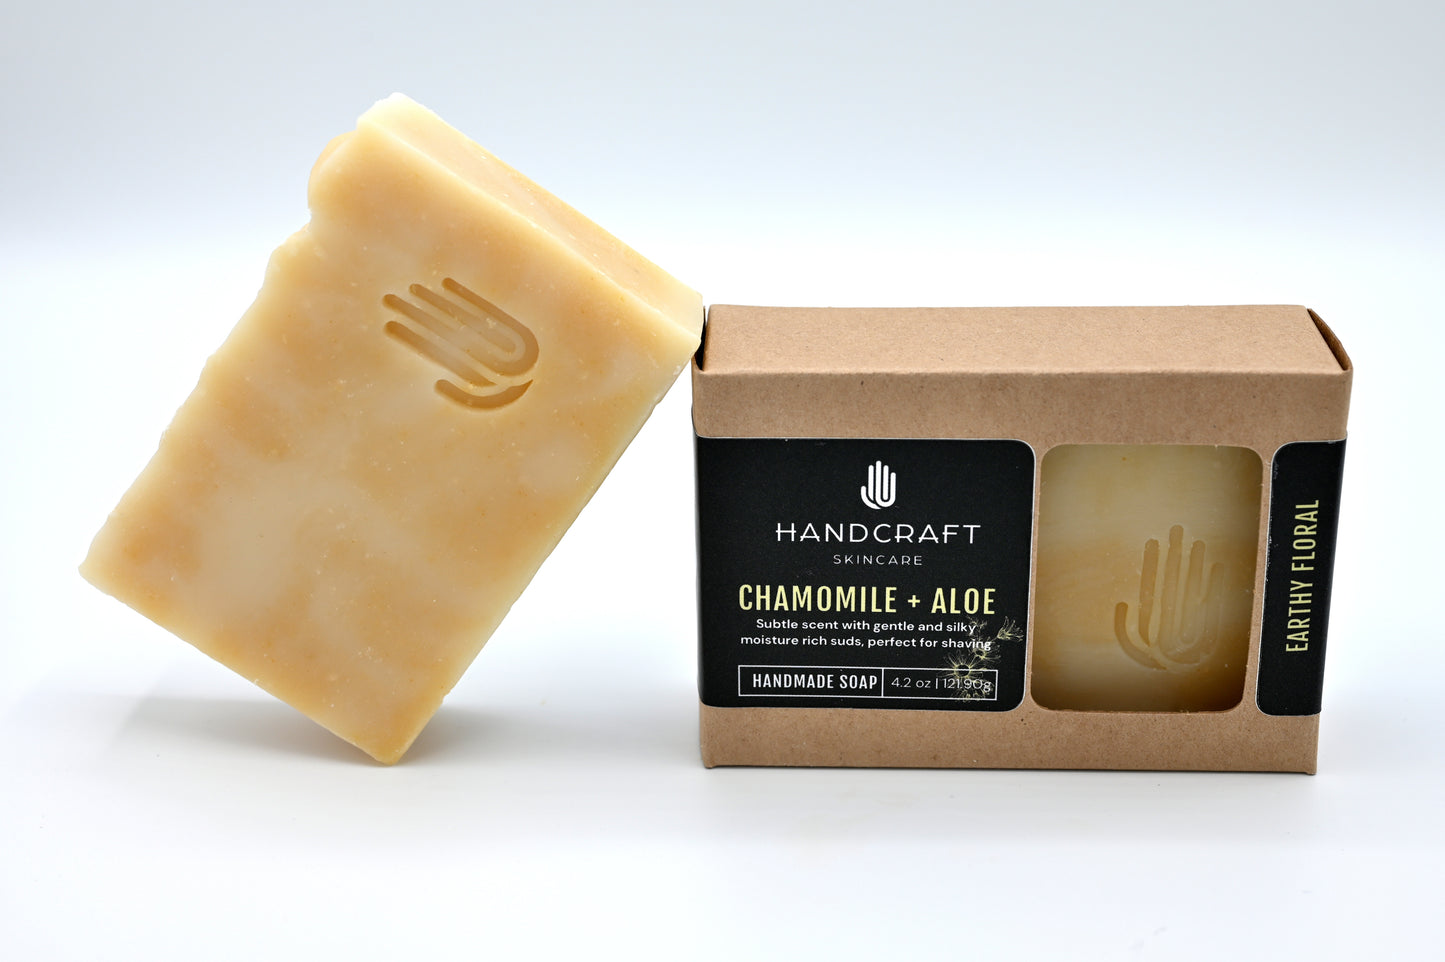 yellow and white swirled chamomile and aloe soap is unpackaged and leaning at an angle on a packaged chamomile and aloe soap in a Kraft box with a black label